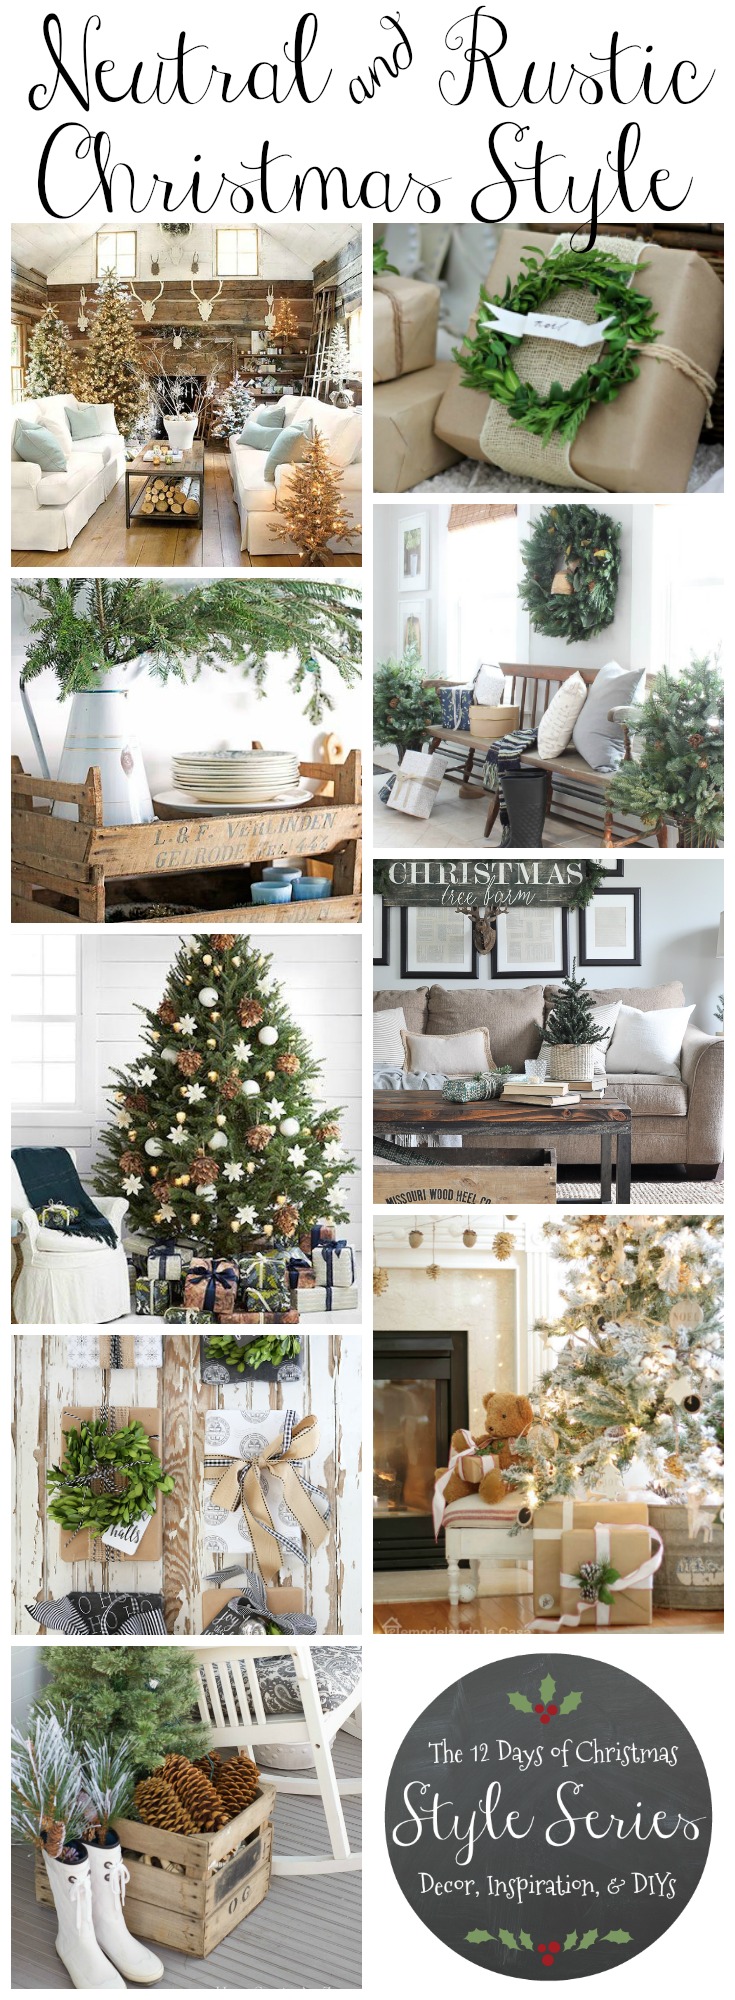 neutral-rustic-christmas-style-decor-diys-and-holiday-inspiration